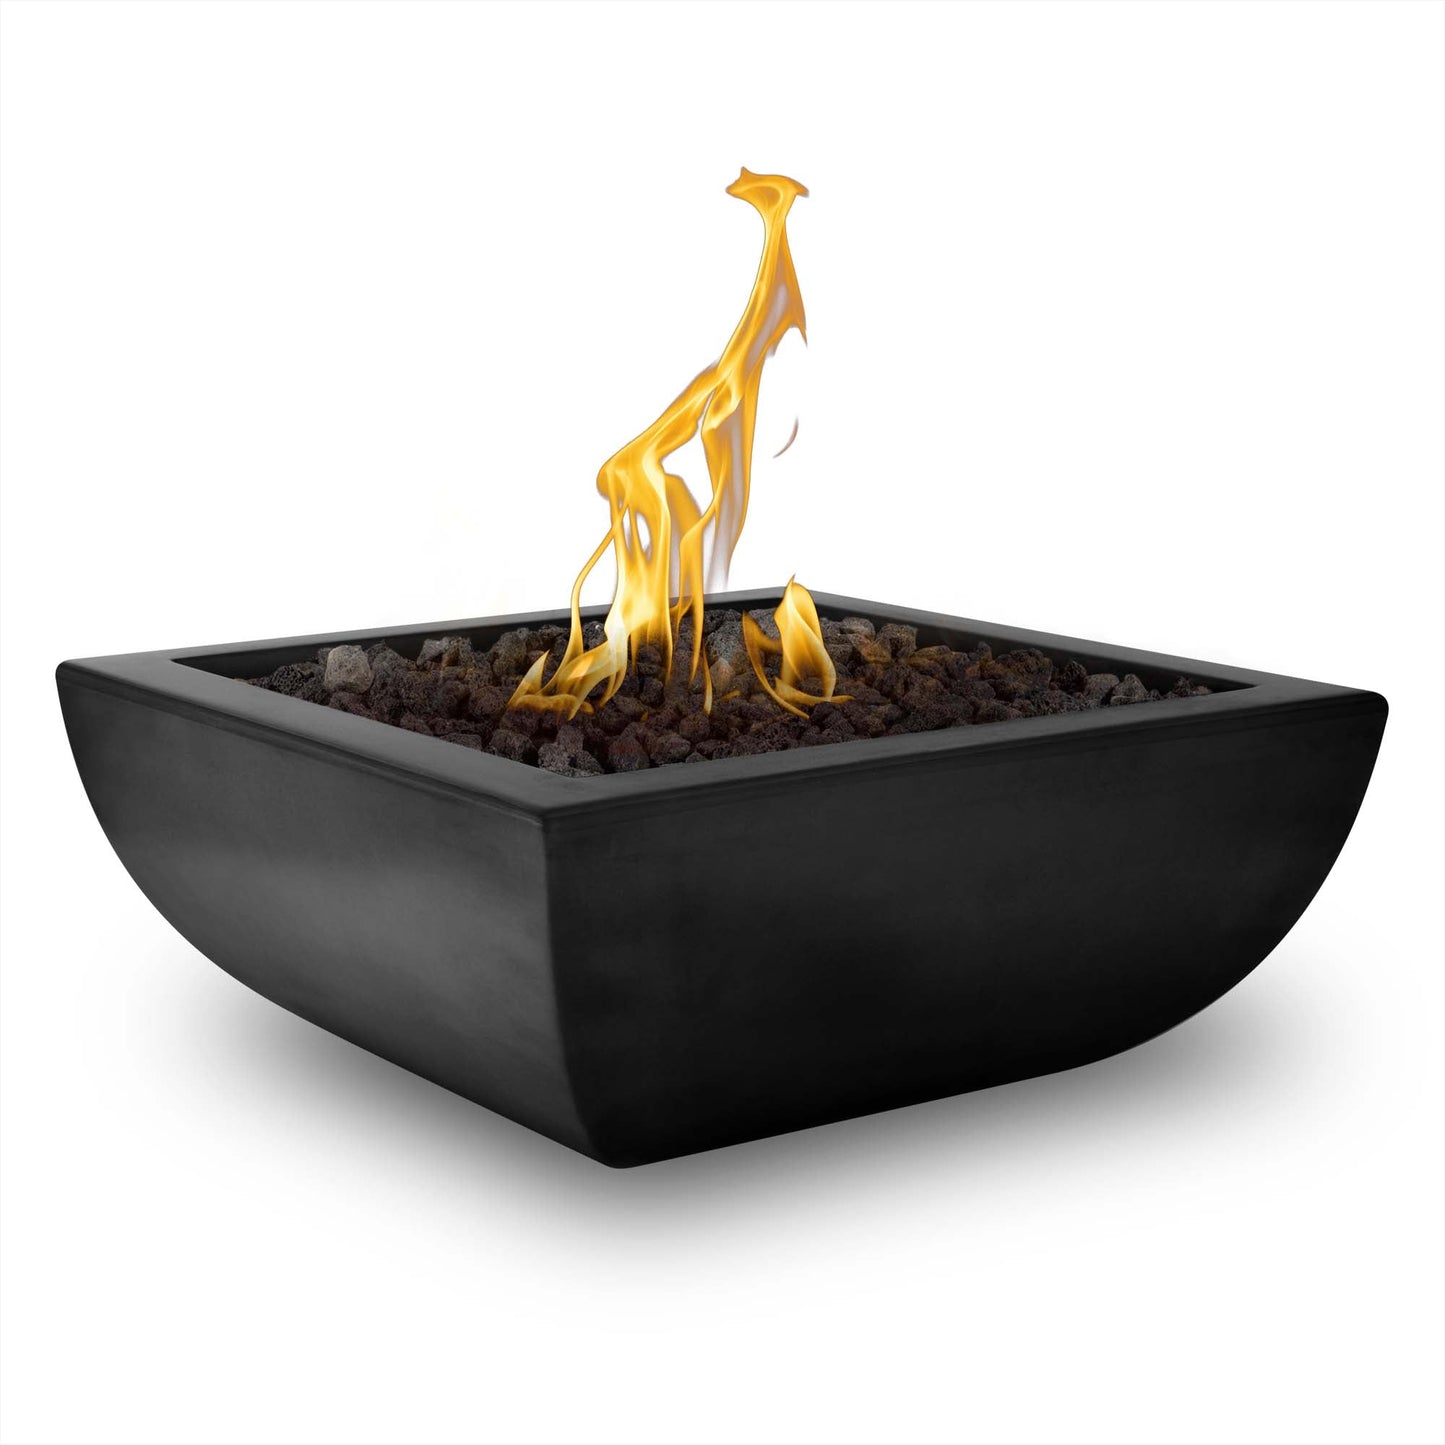 The Outdoor Plus Square Avalon 24" Rustic Coffee GFRC Concrete Natural Gas Fire Bowl with Match Lit with Flame Sense Ignition